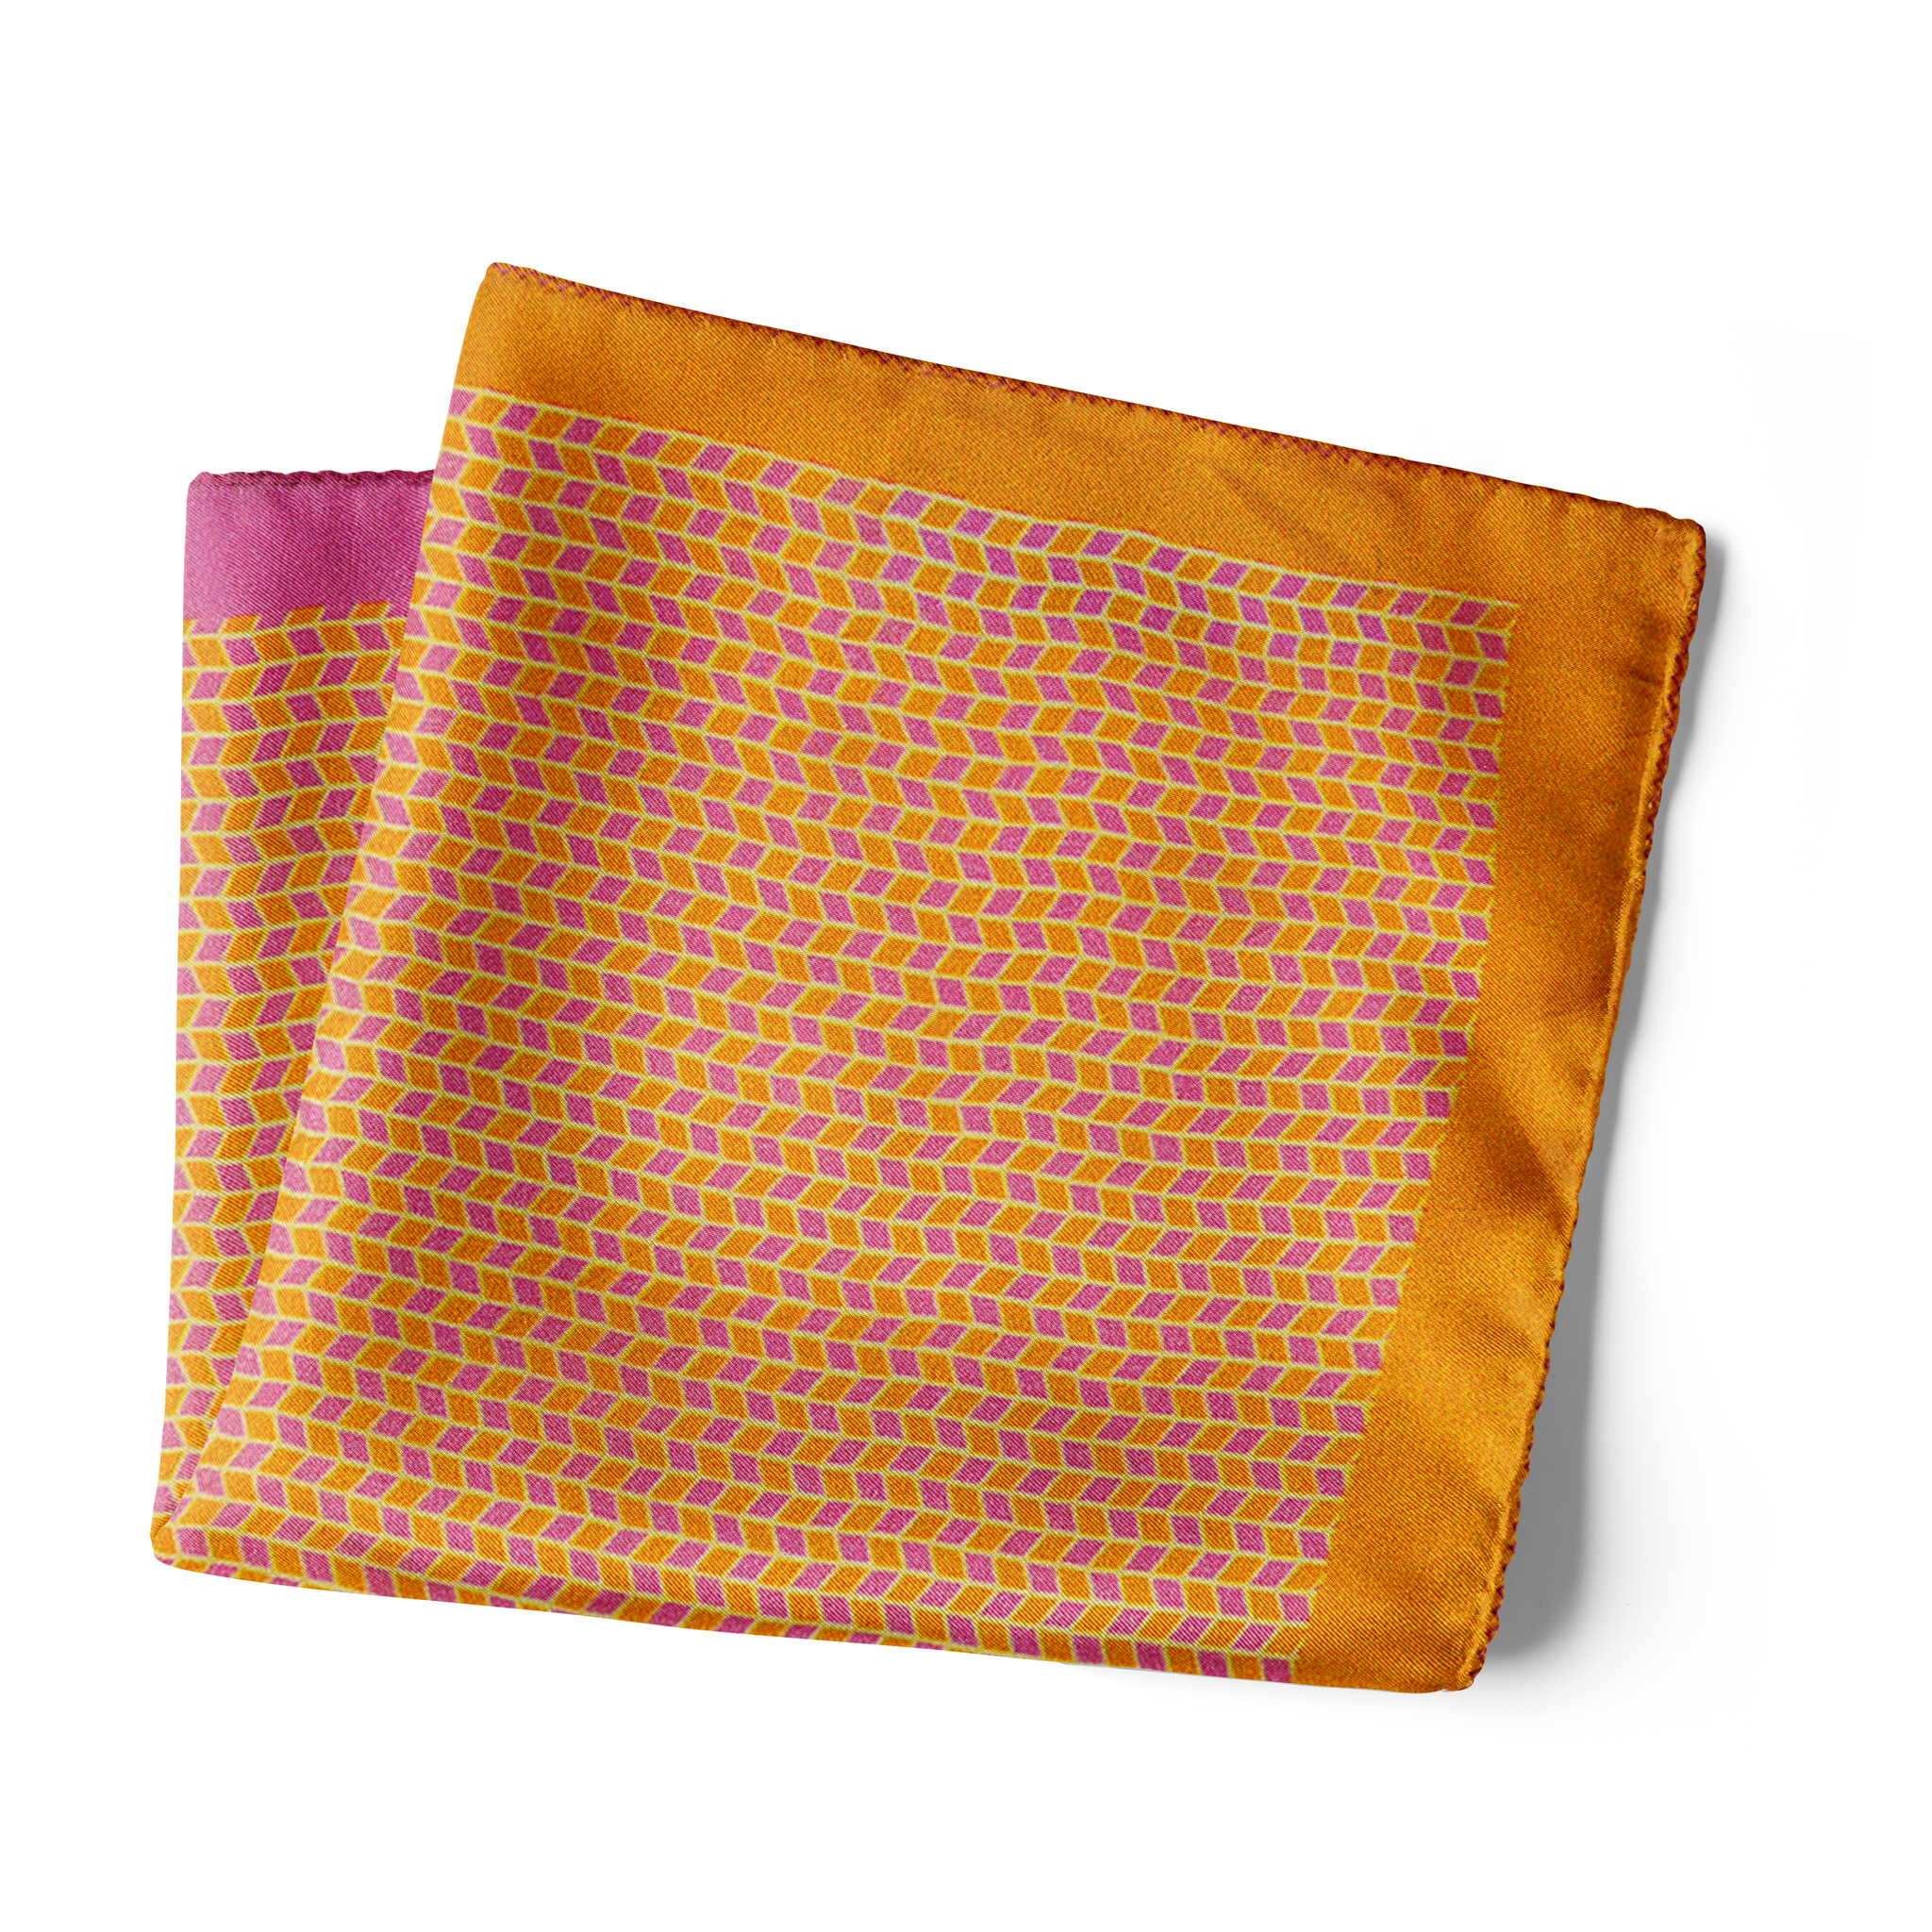 Chokore 2-in-1 Gold & Purple Silk Pocket Square - Indian At Heart line